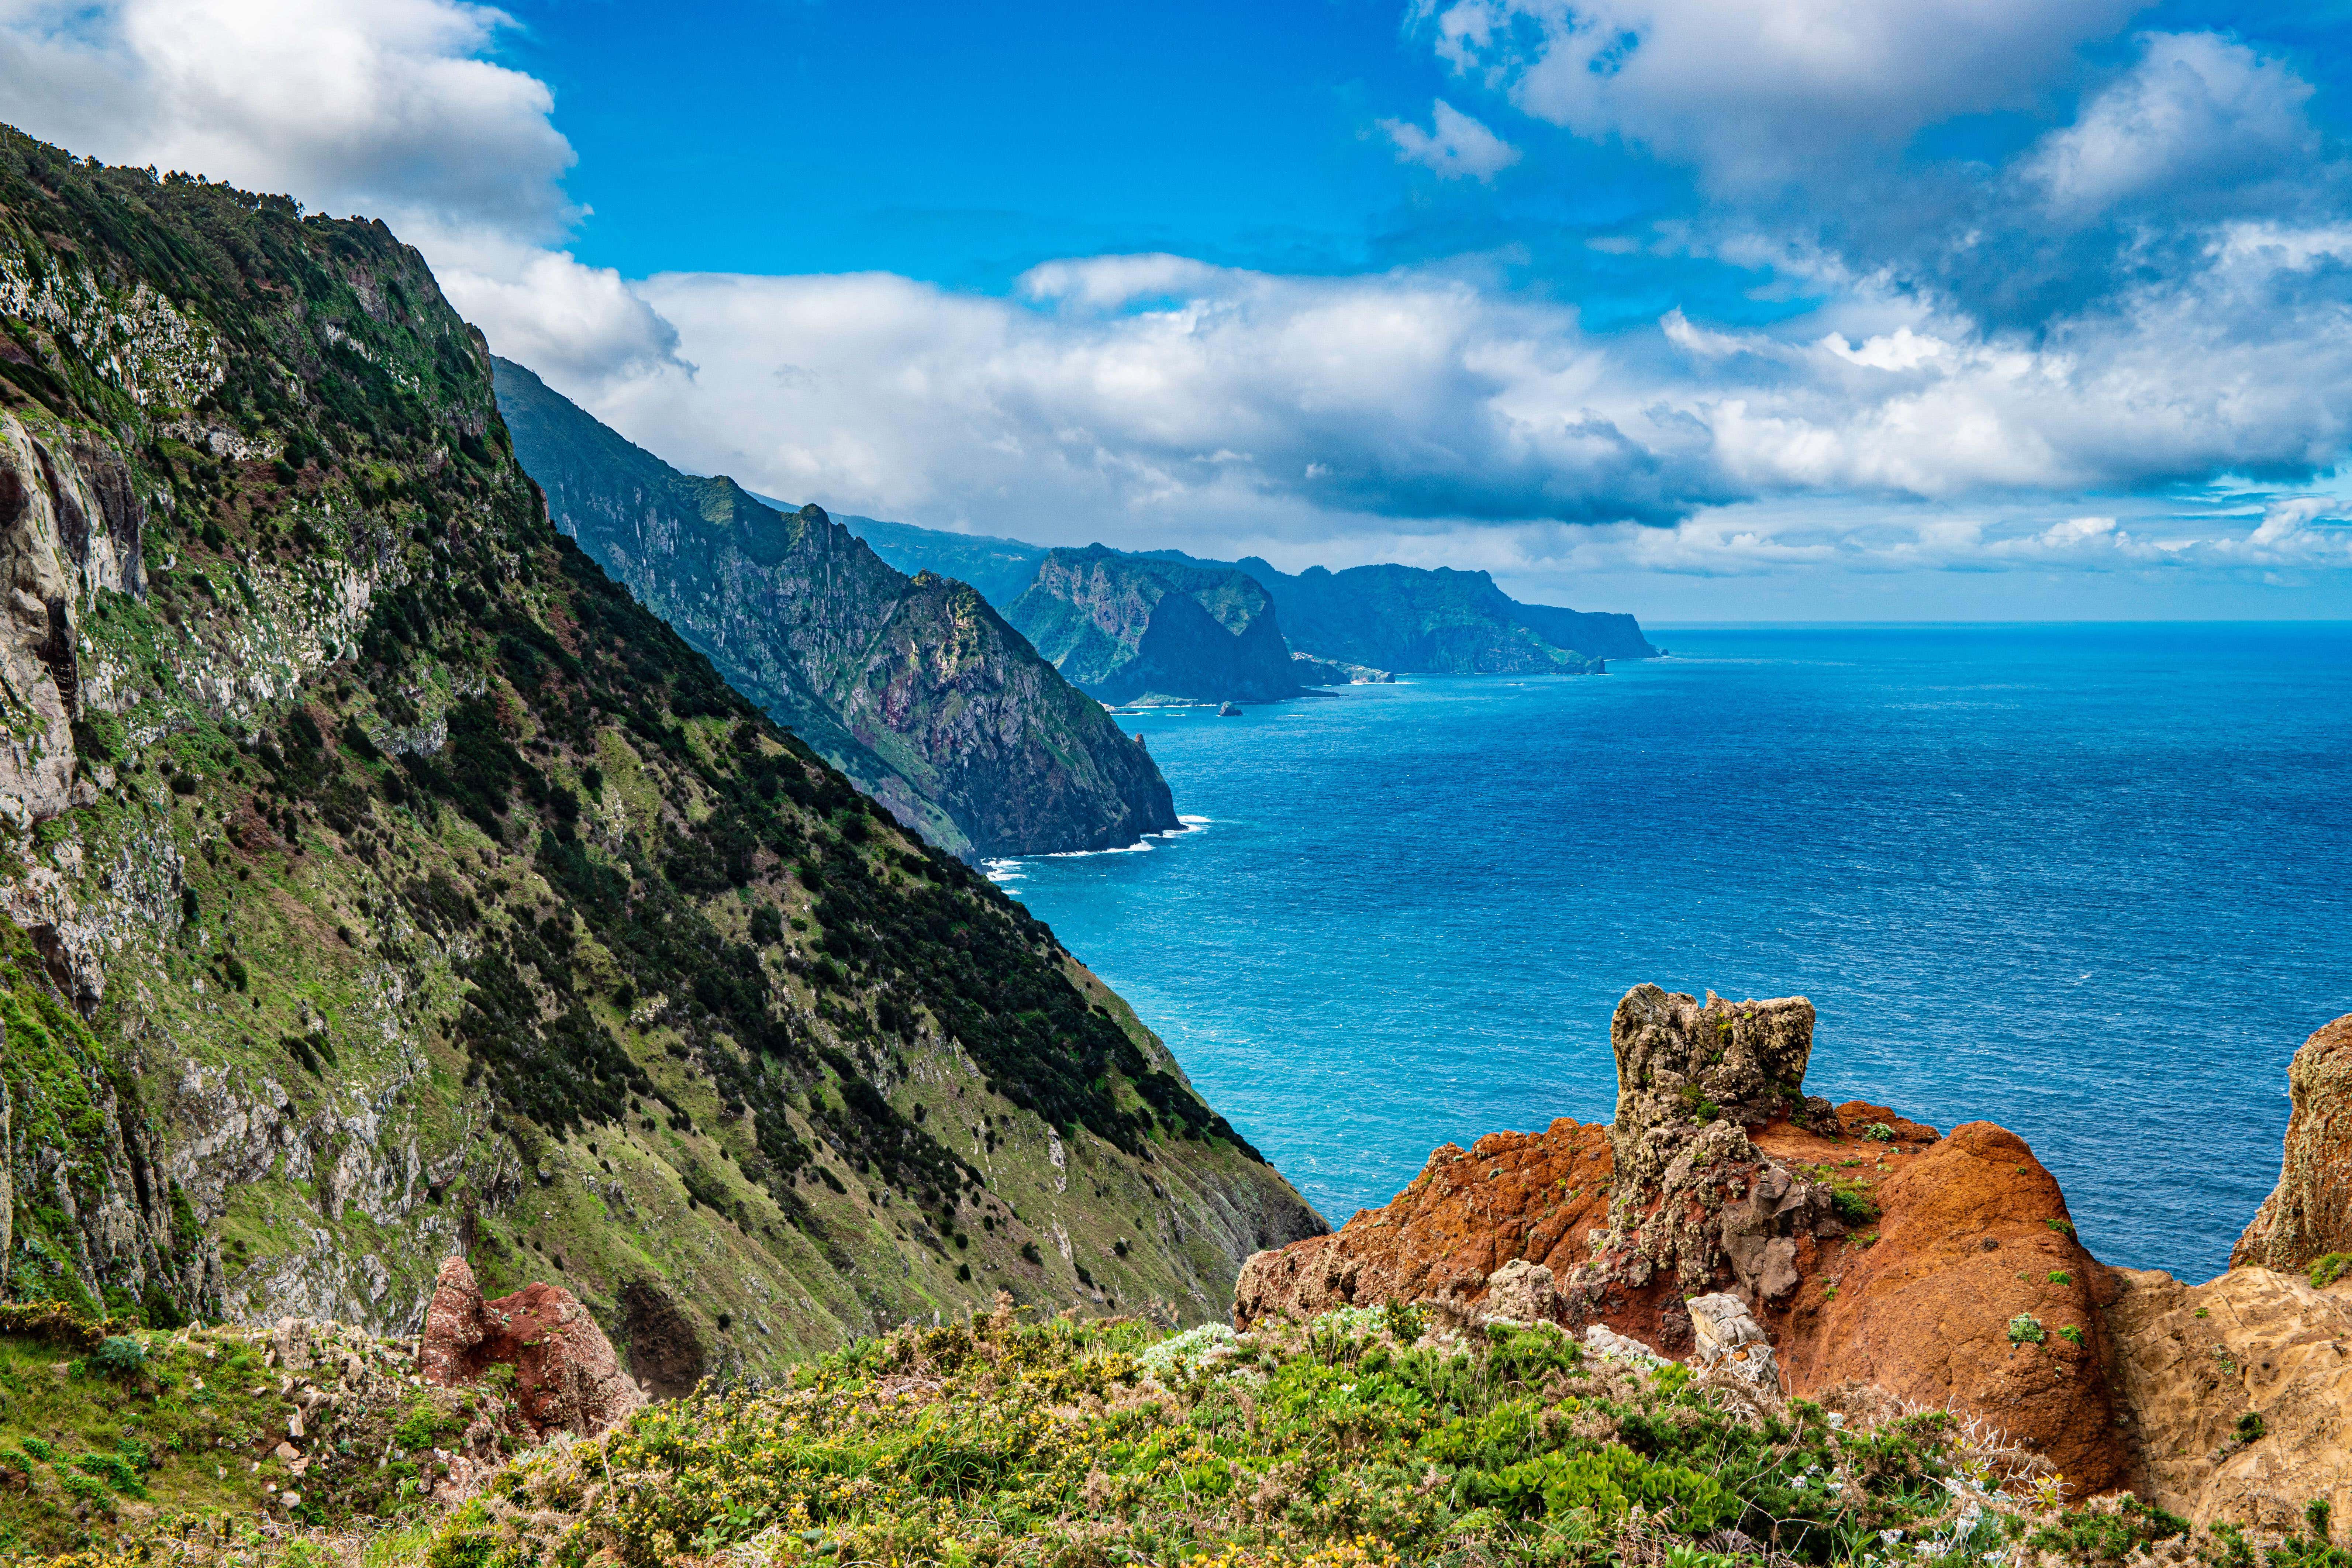 Madeira: a spectacular rocky outcrop in the mid-Atlantic